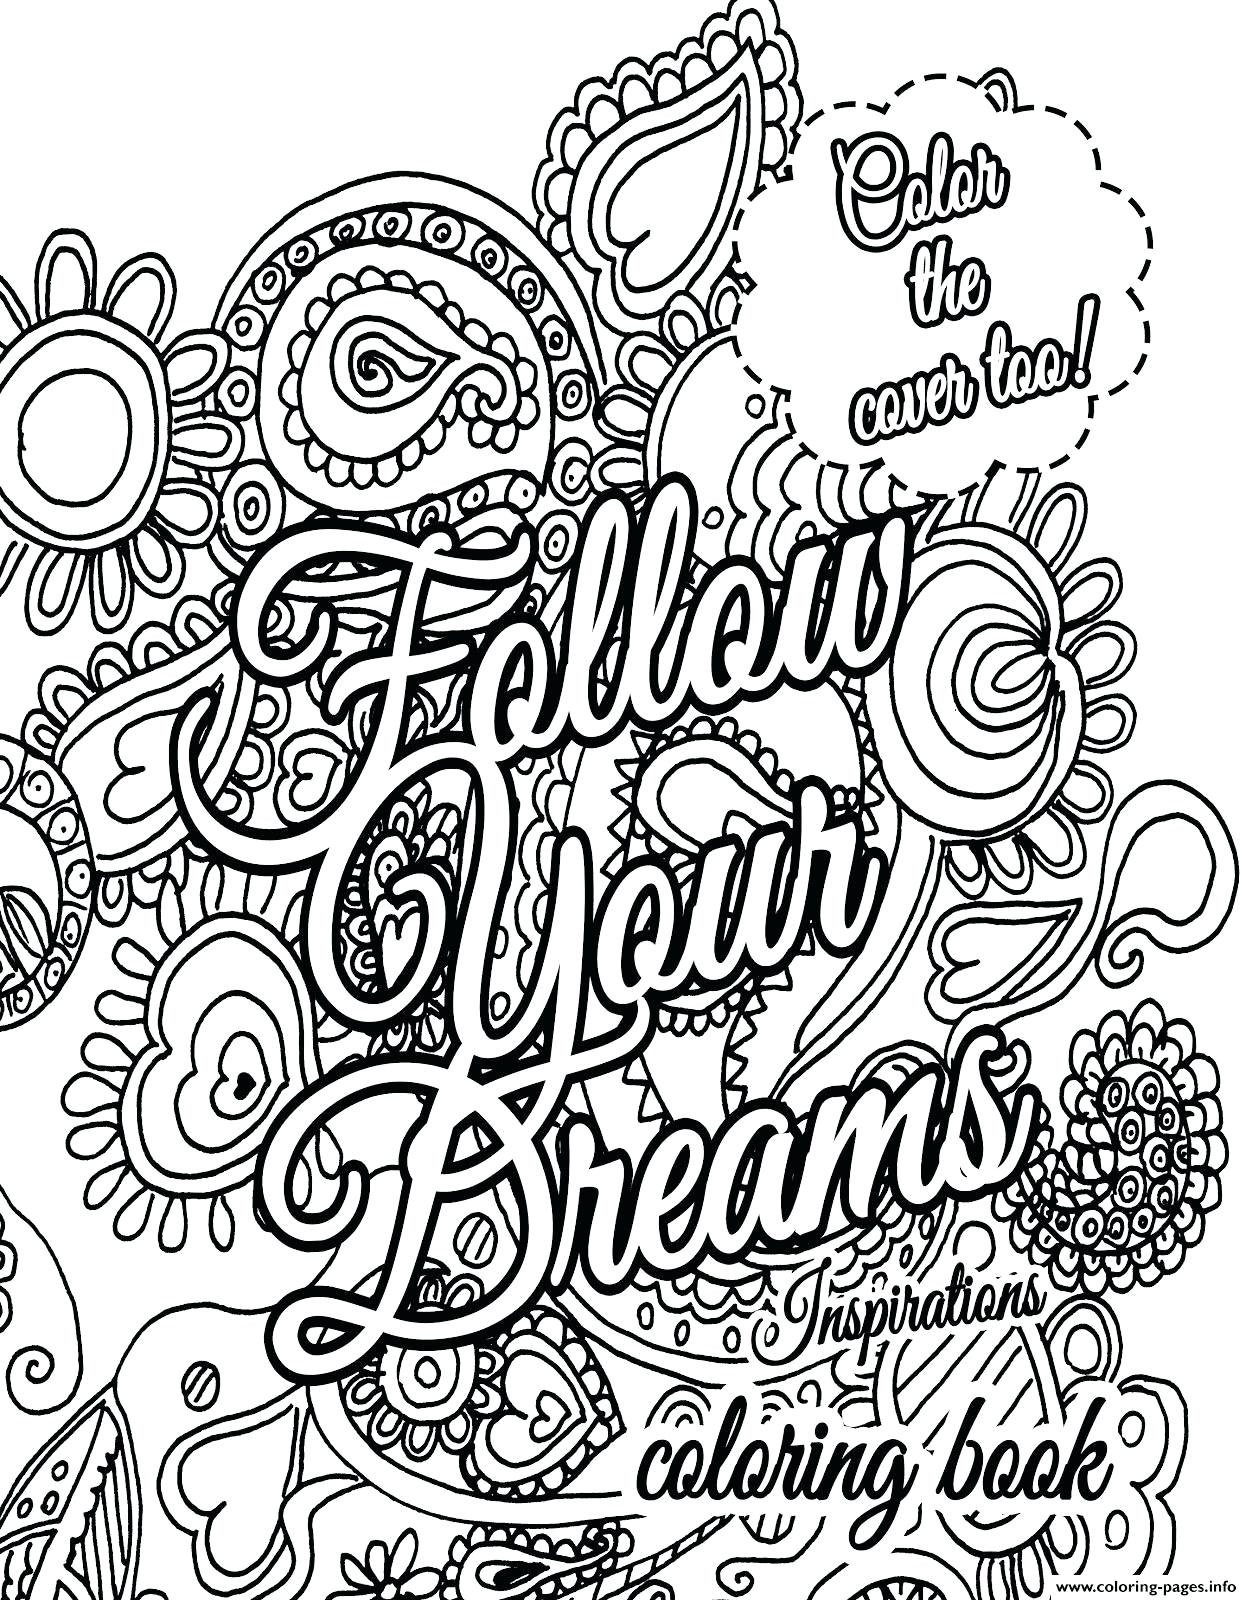 Coloring Pages Quotes - Line Coloring Pages Awesome Free Printable - Free Printable Quote Coloring Pages For Adults